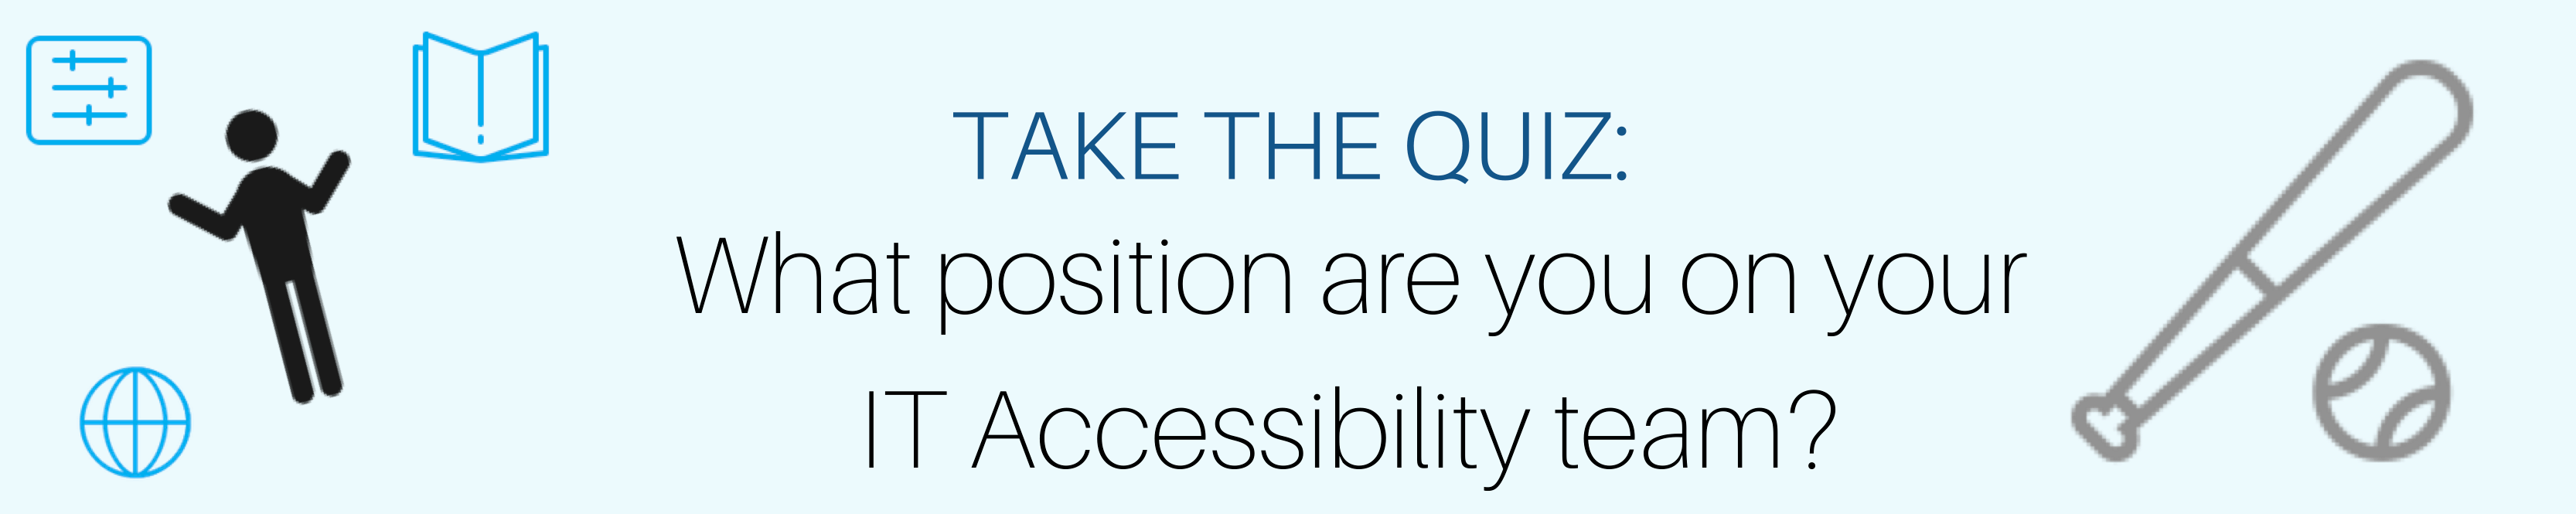 Click to take the quiz and find out which accessibility team you belong to!